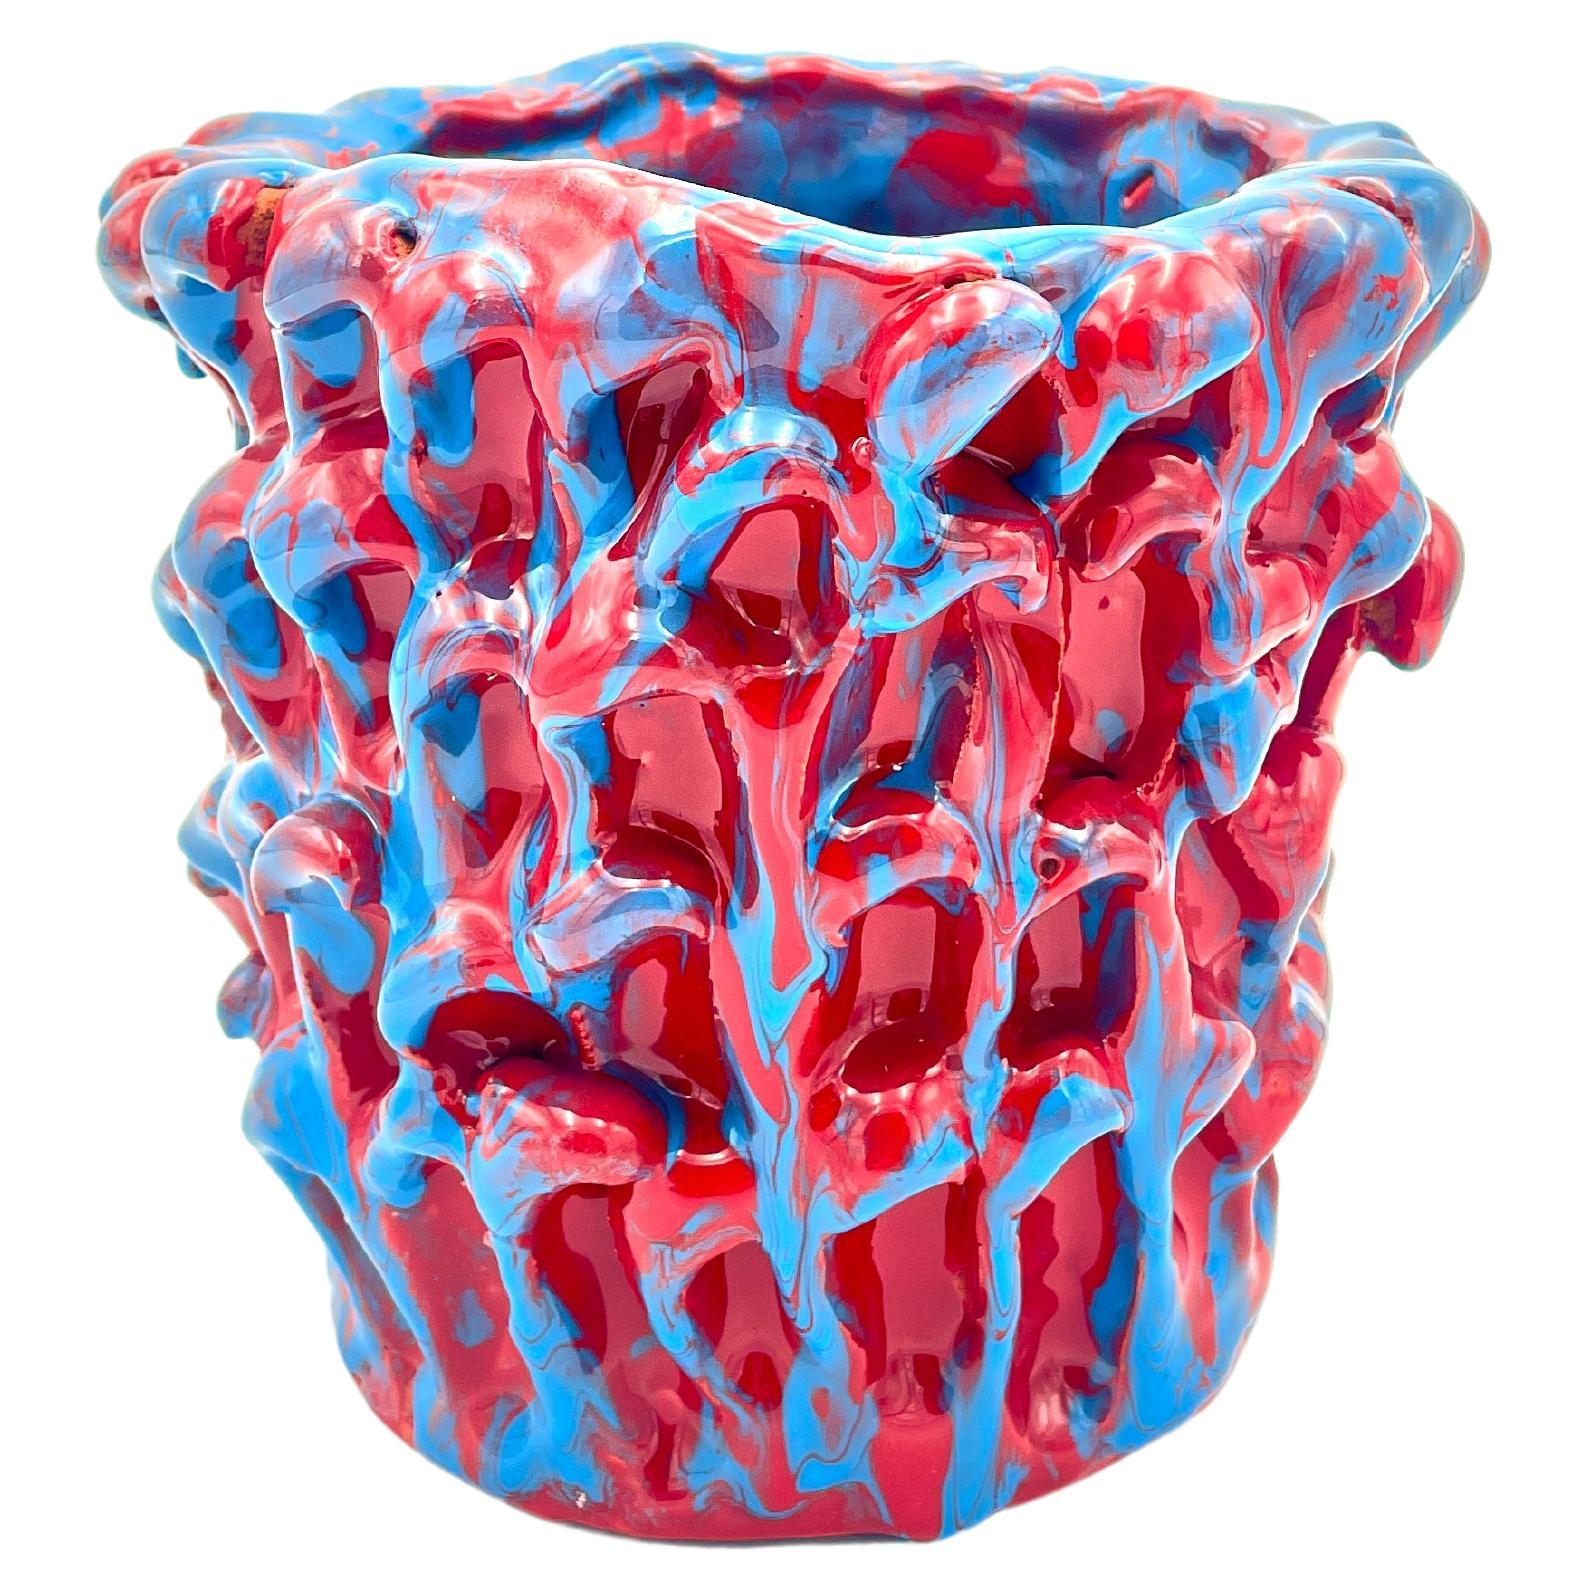 Onda Vase, Turquoise and Danger Red 01